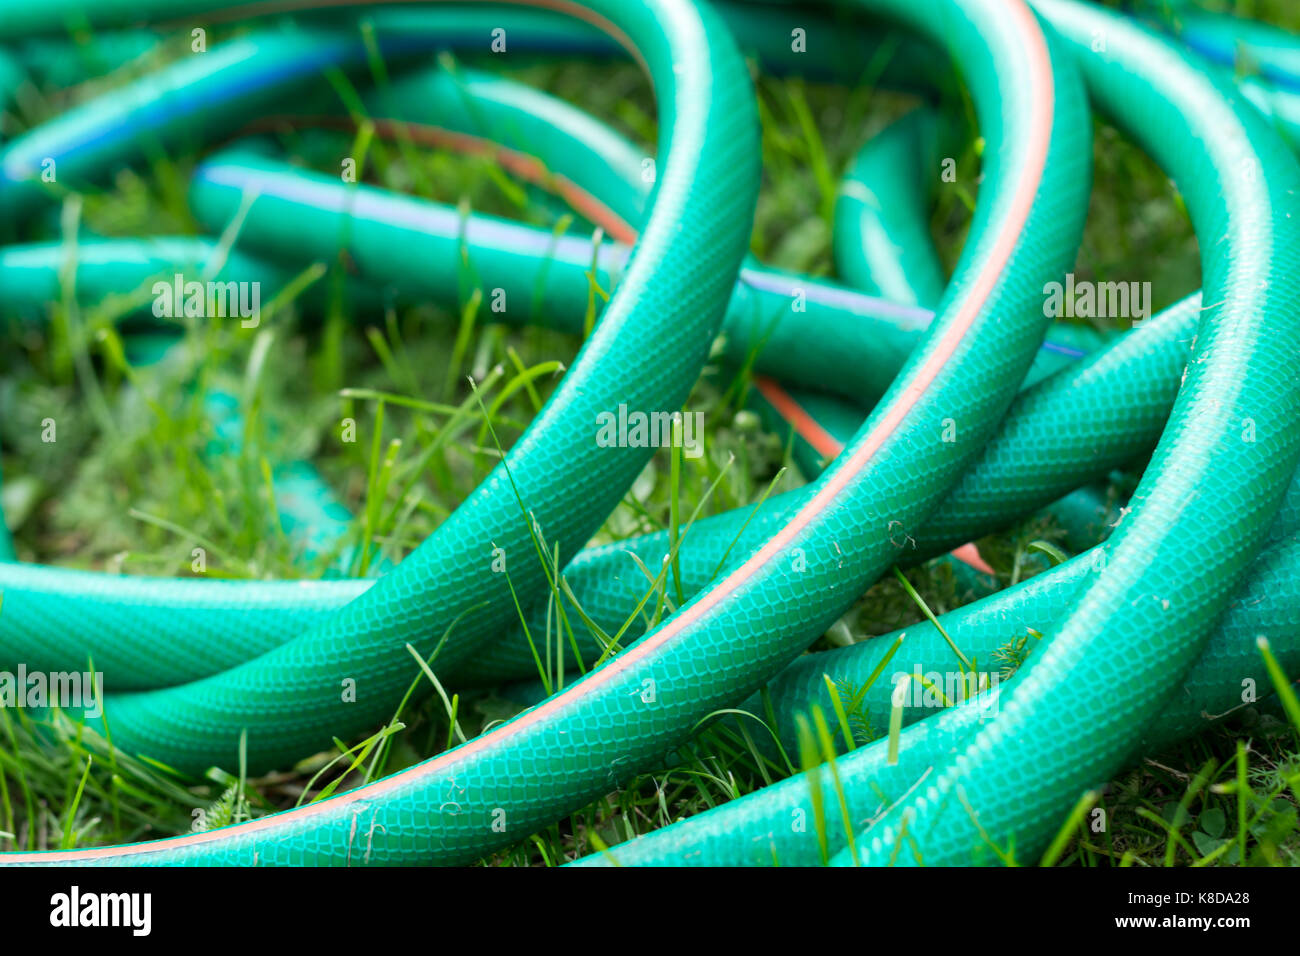 A green and orange hose for watering the garden close up Stock Photo - Alamy